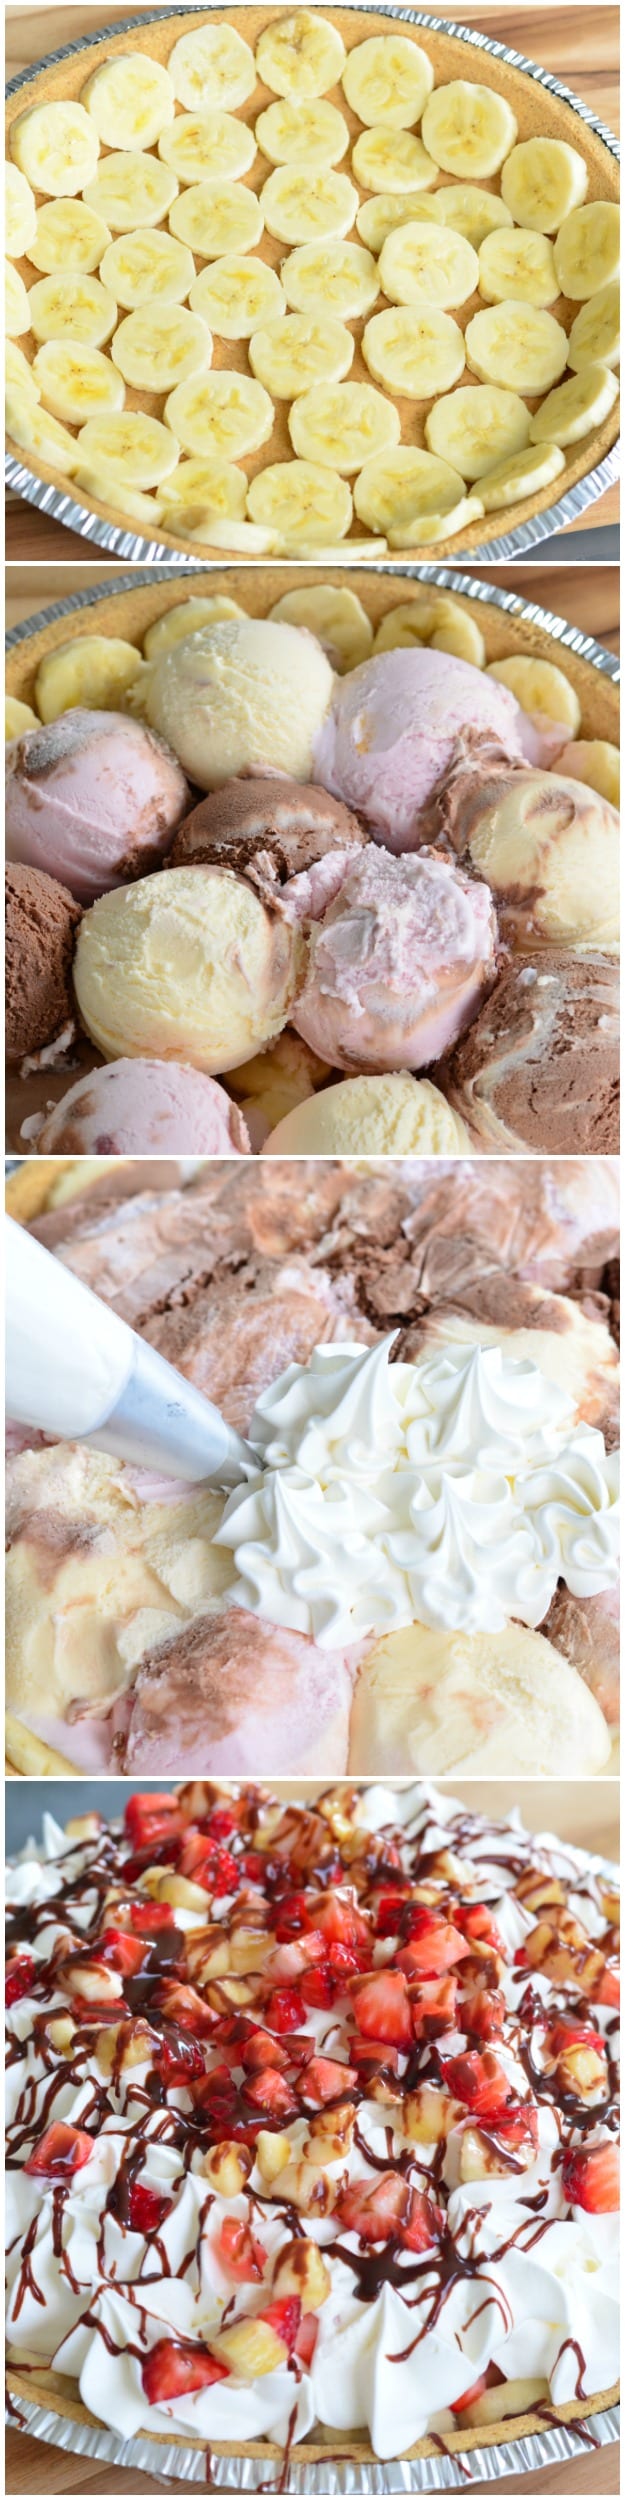 steps collage 1st photo bananas on top of pie crust, 2nd photo ice cream scoops in a pie tin, 3rd photo whipped cream being pipped onto pie, last photo of completed pie 